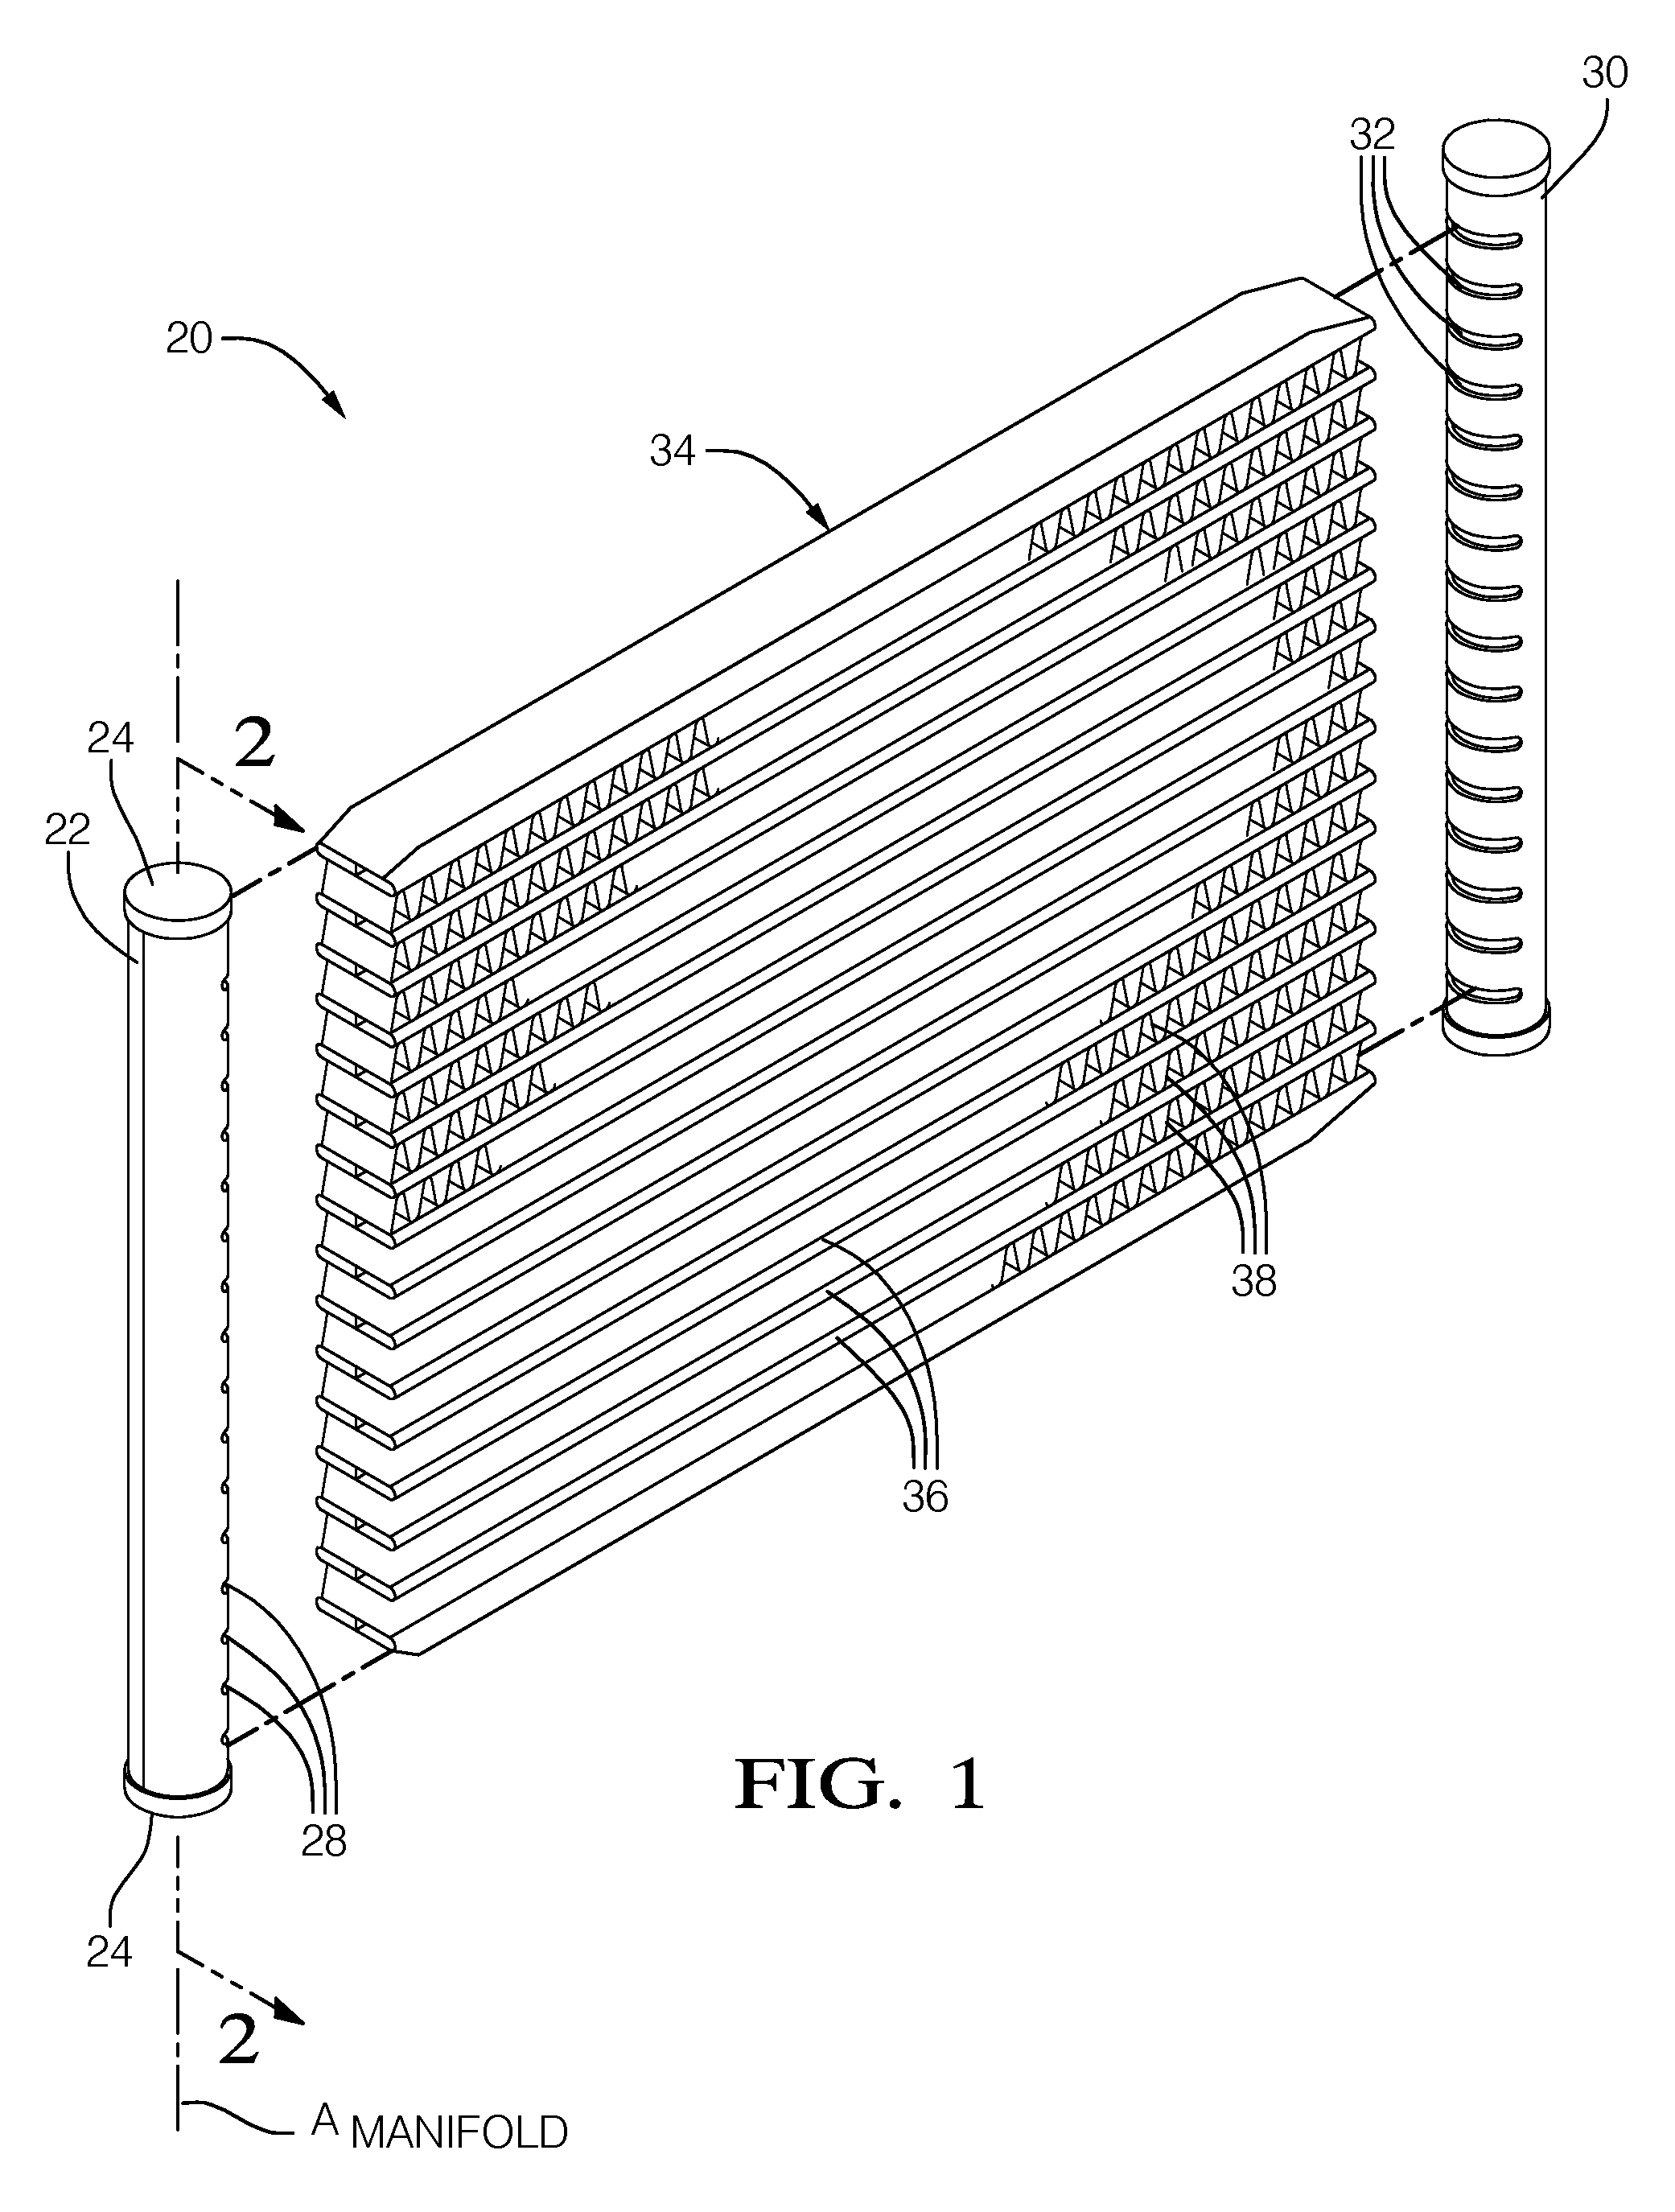 Heat exchanger assembly having a distributor tube retainer tab